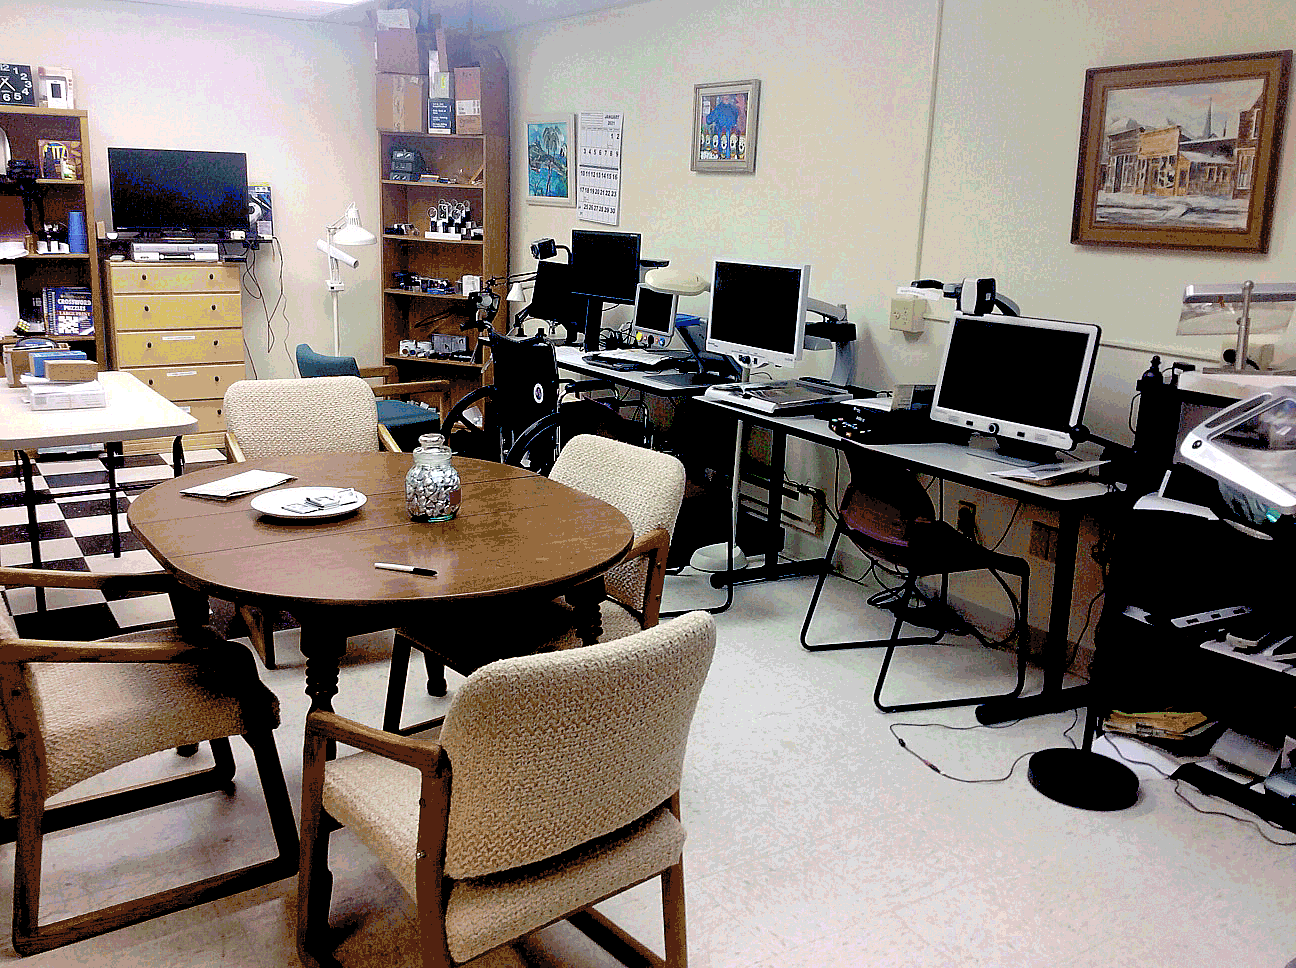 2 images of the Bozeman Vision Center, with a kitchen area, some tables and along the wall are computers, optical character reading devices and magnifiers